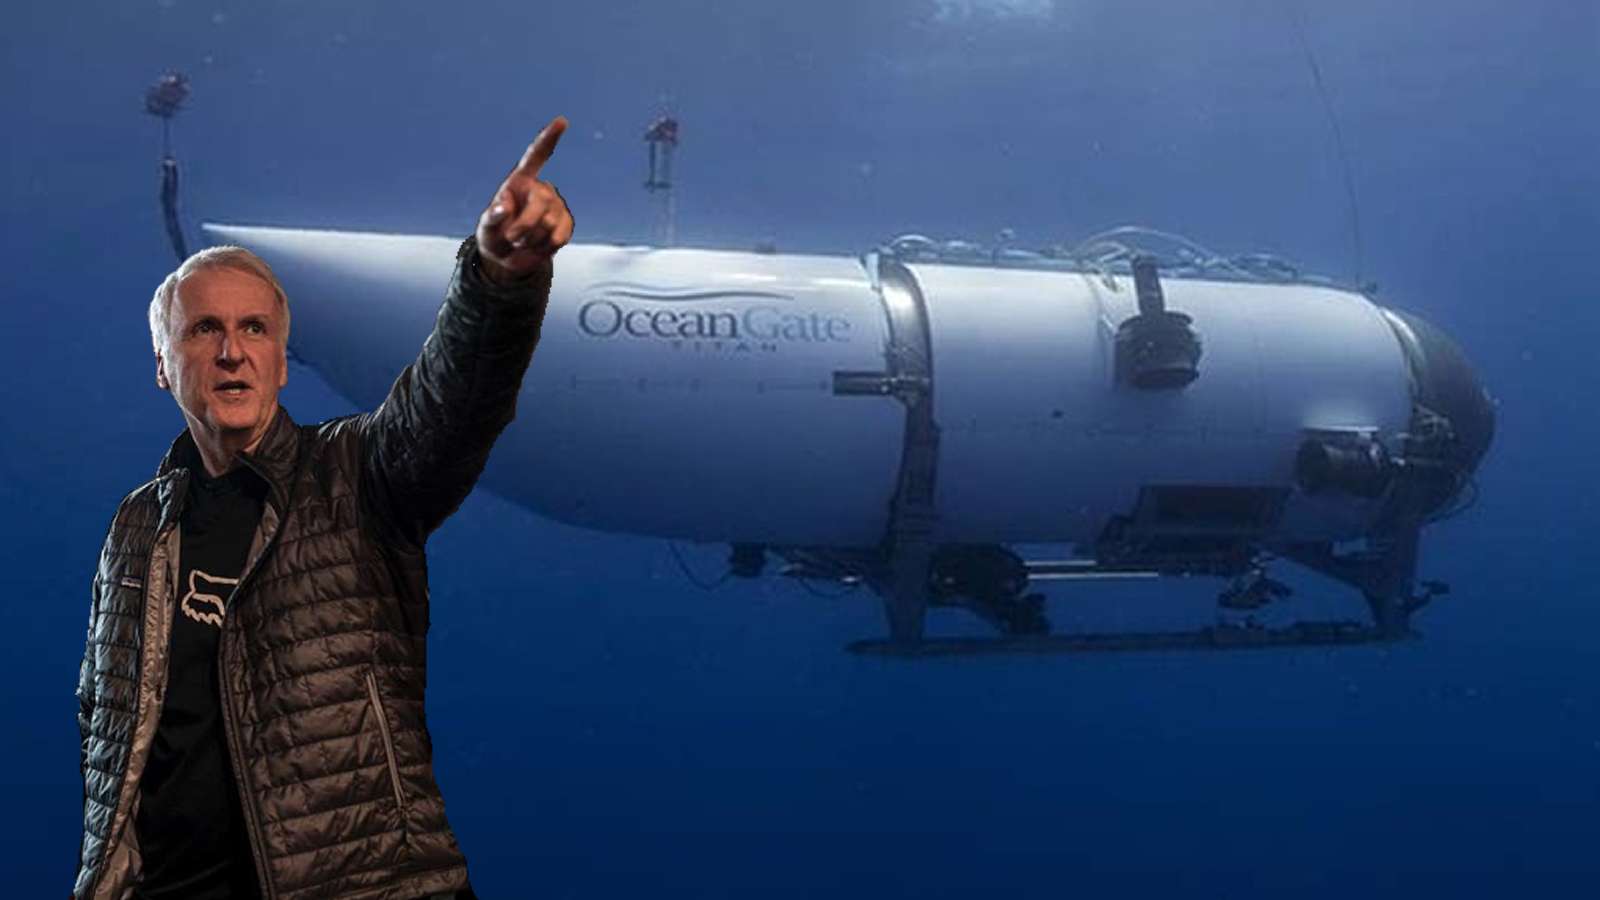 James Cameron shuts down “offensive rumors" of an OceanGate submersible film